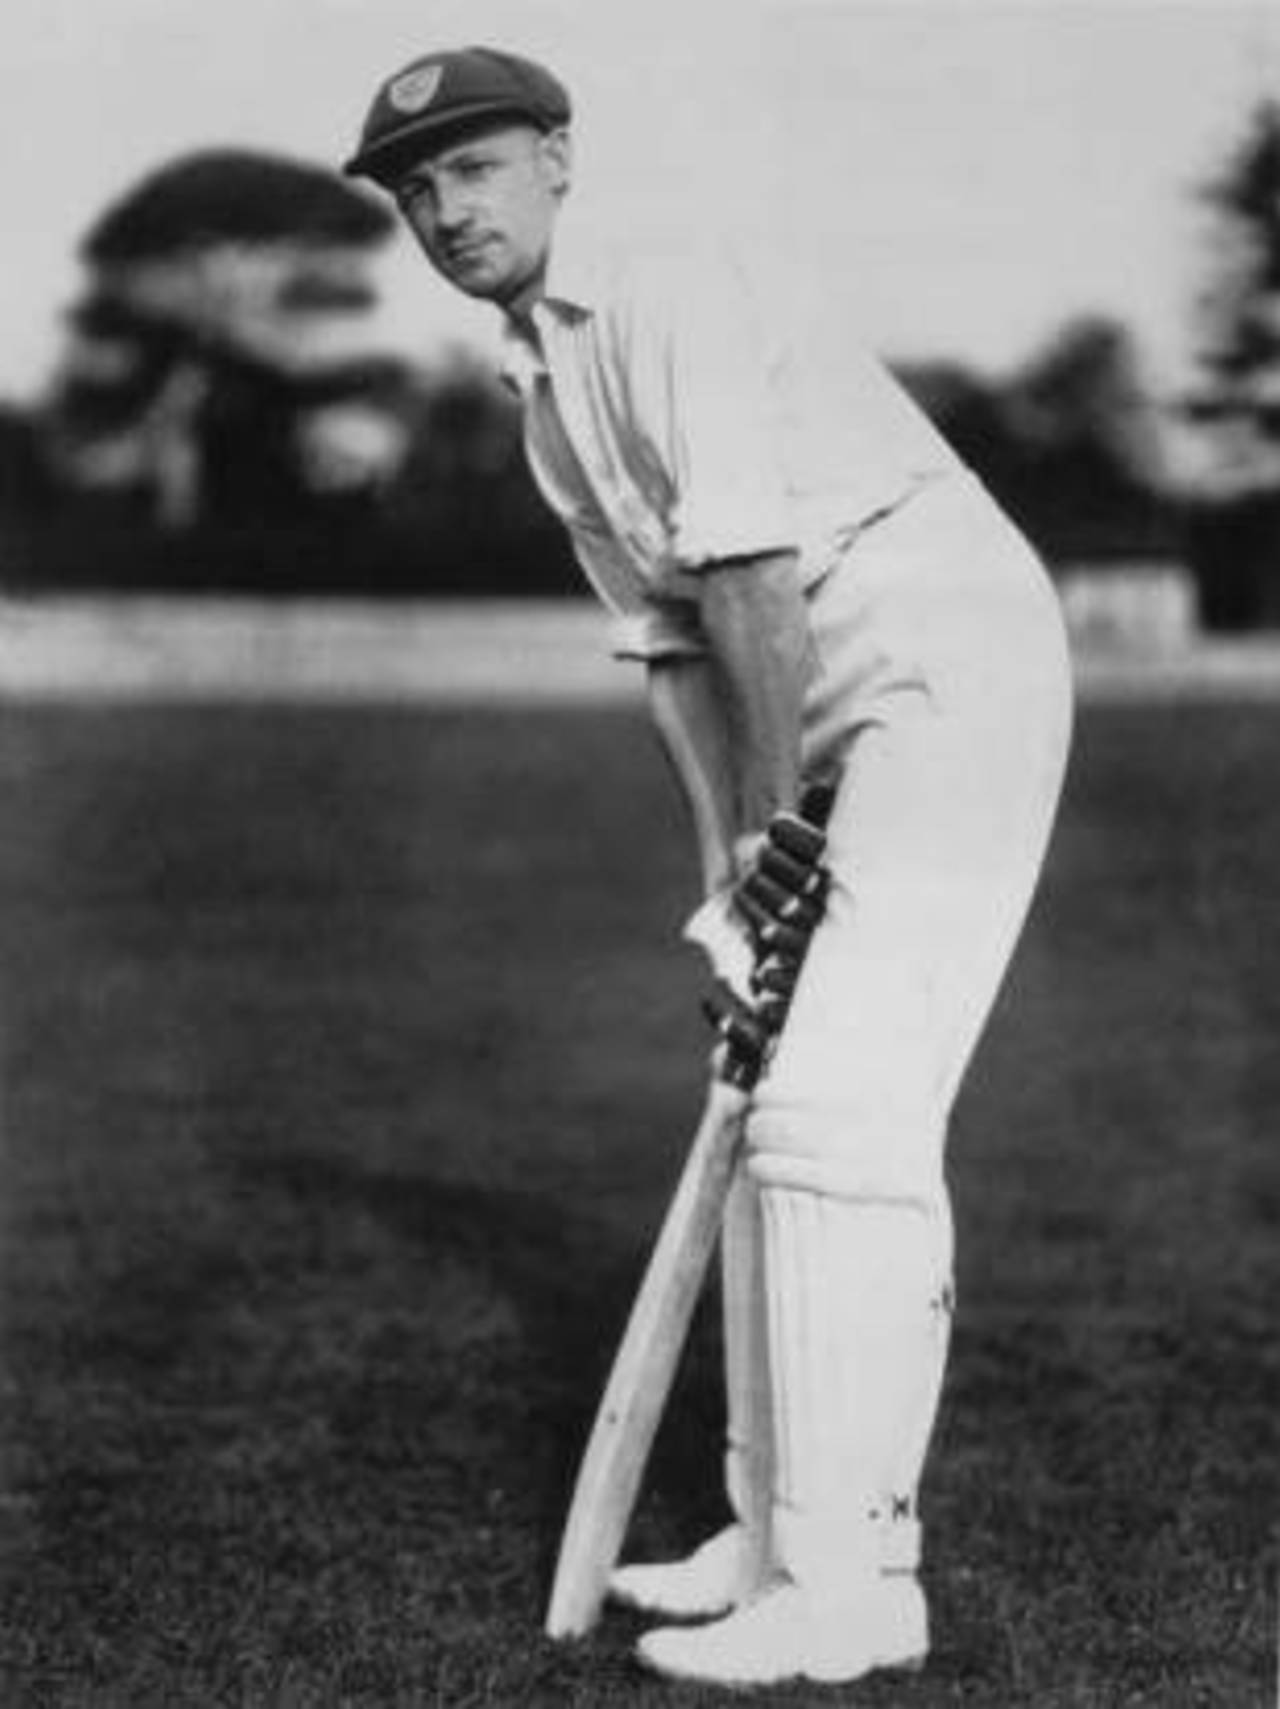 Don Bradman in his stance, 23rd March 1938